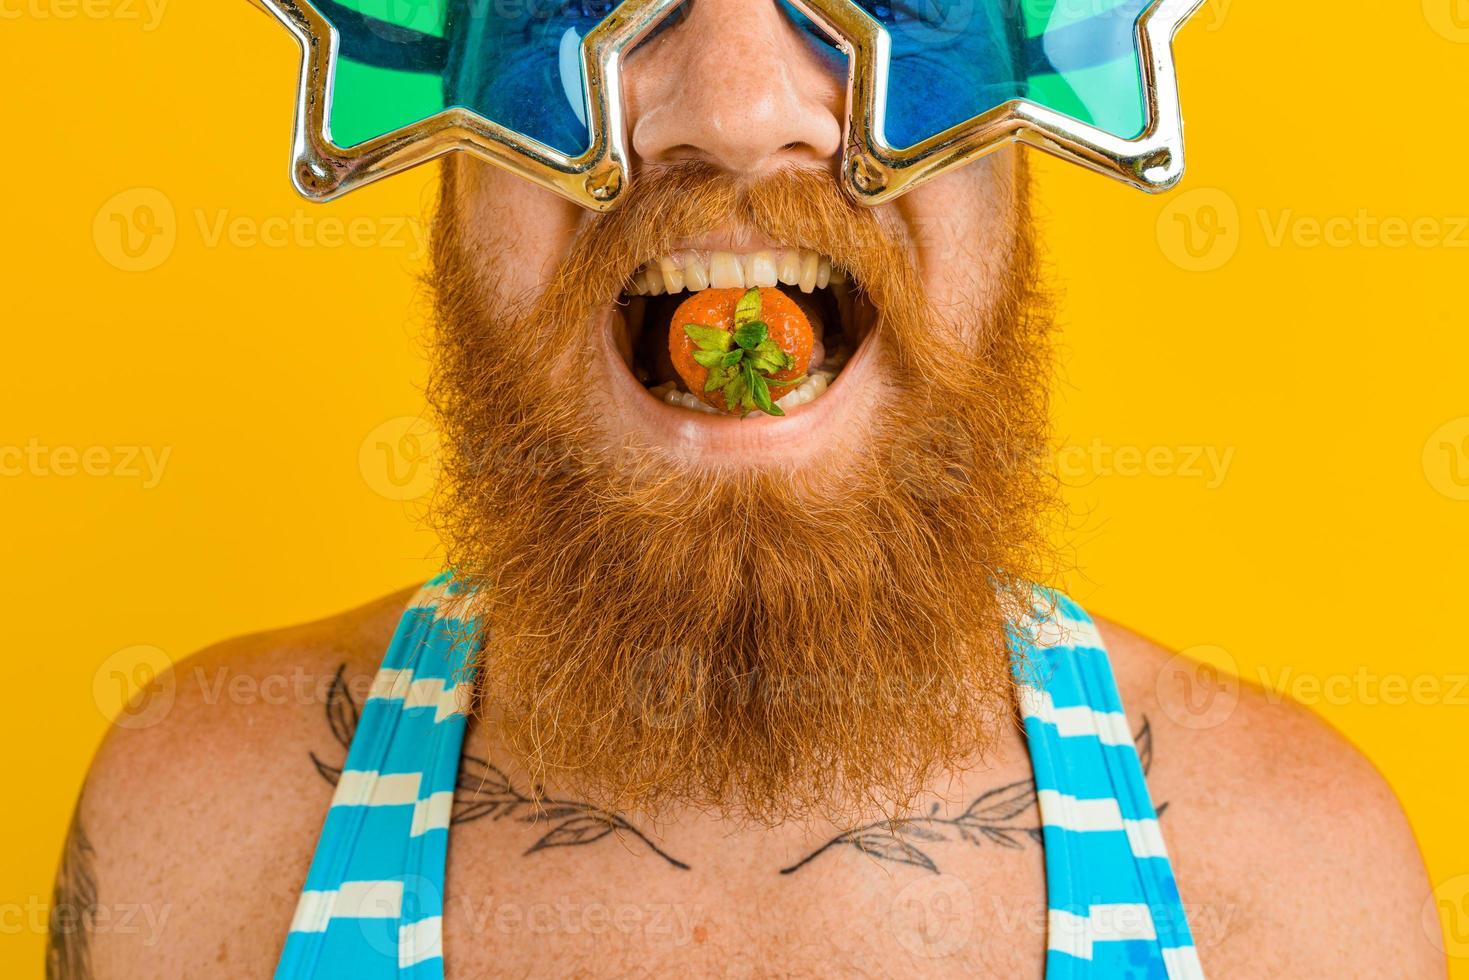 man with beard and sunglasses eats a strawberry photo